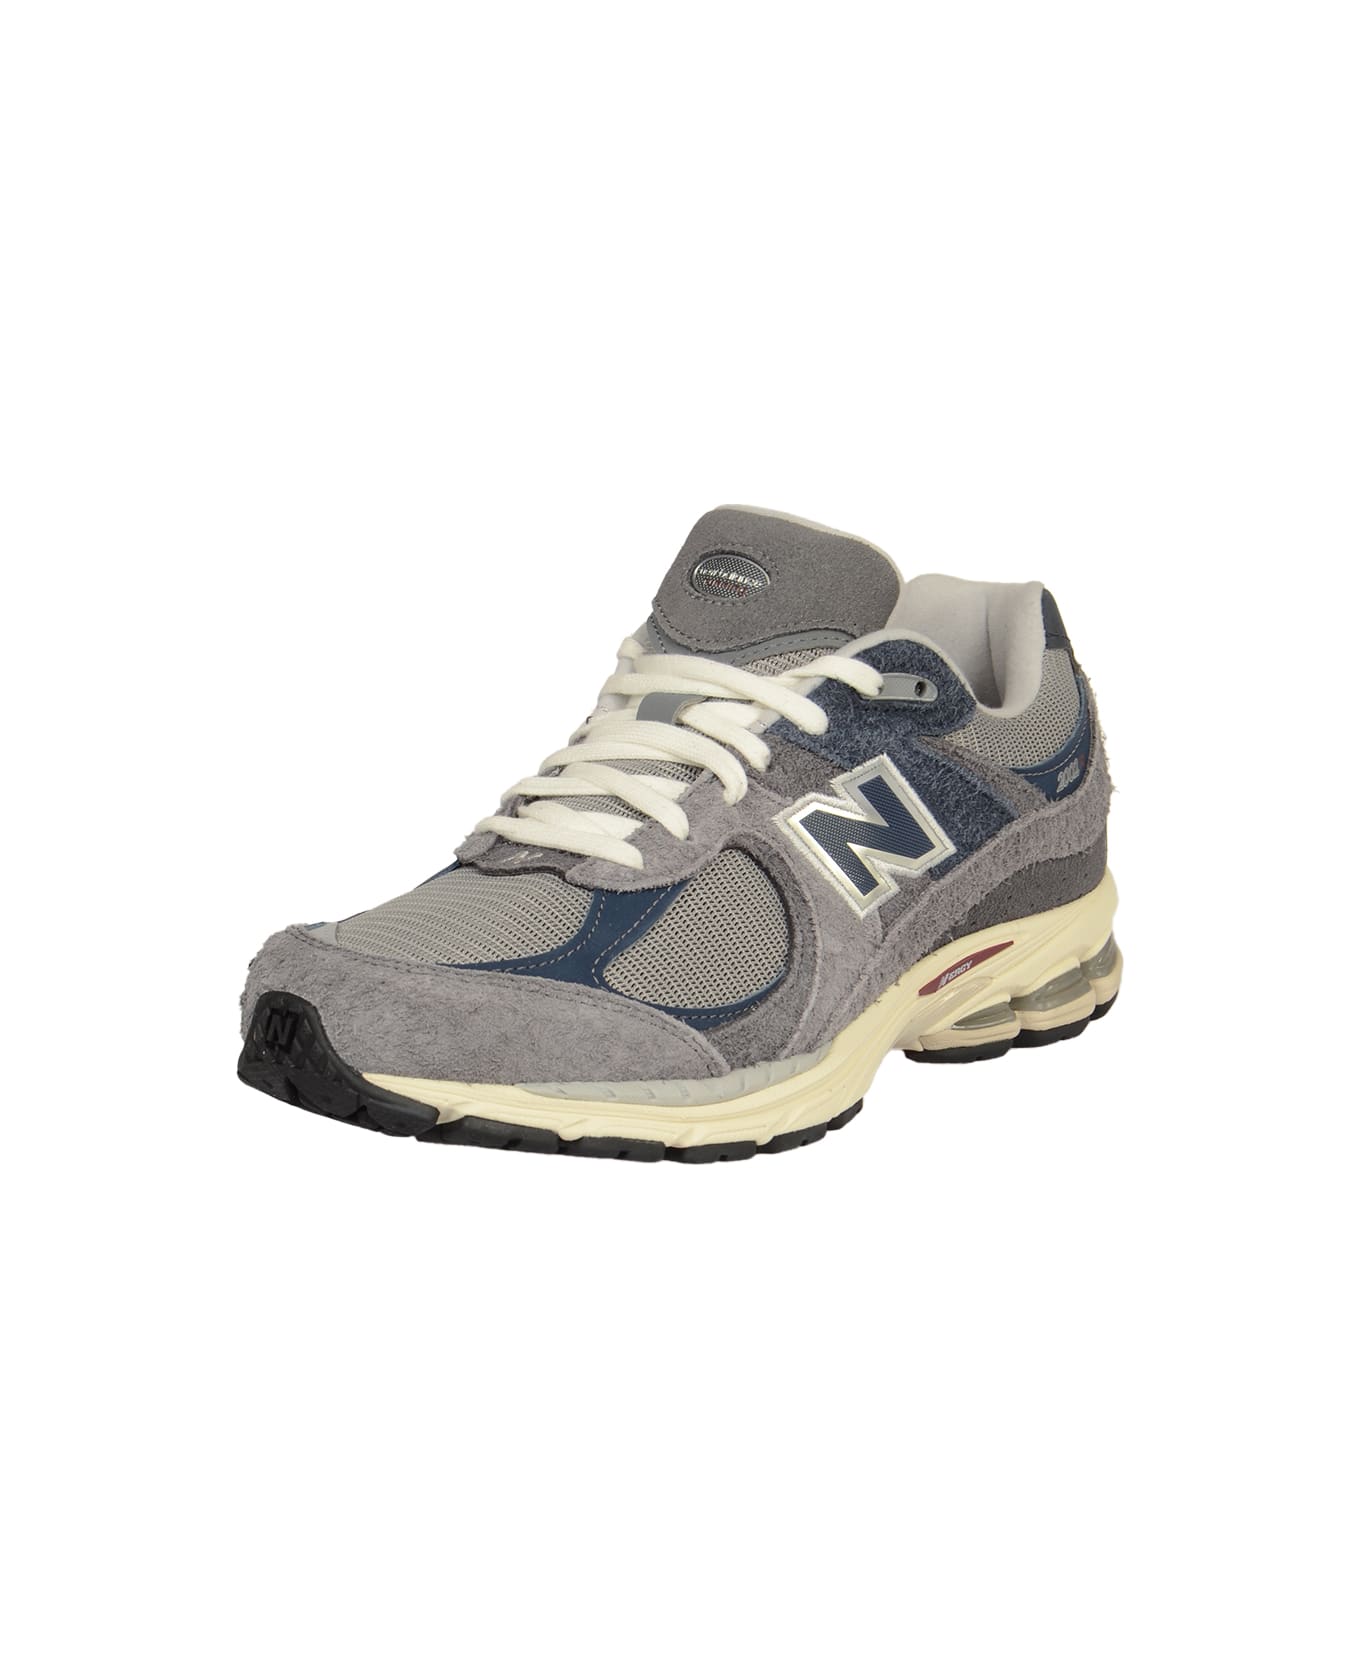 New Balance Logo Patched Sneakers スニーカー